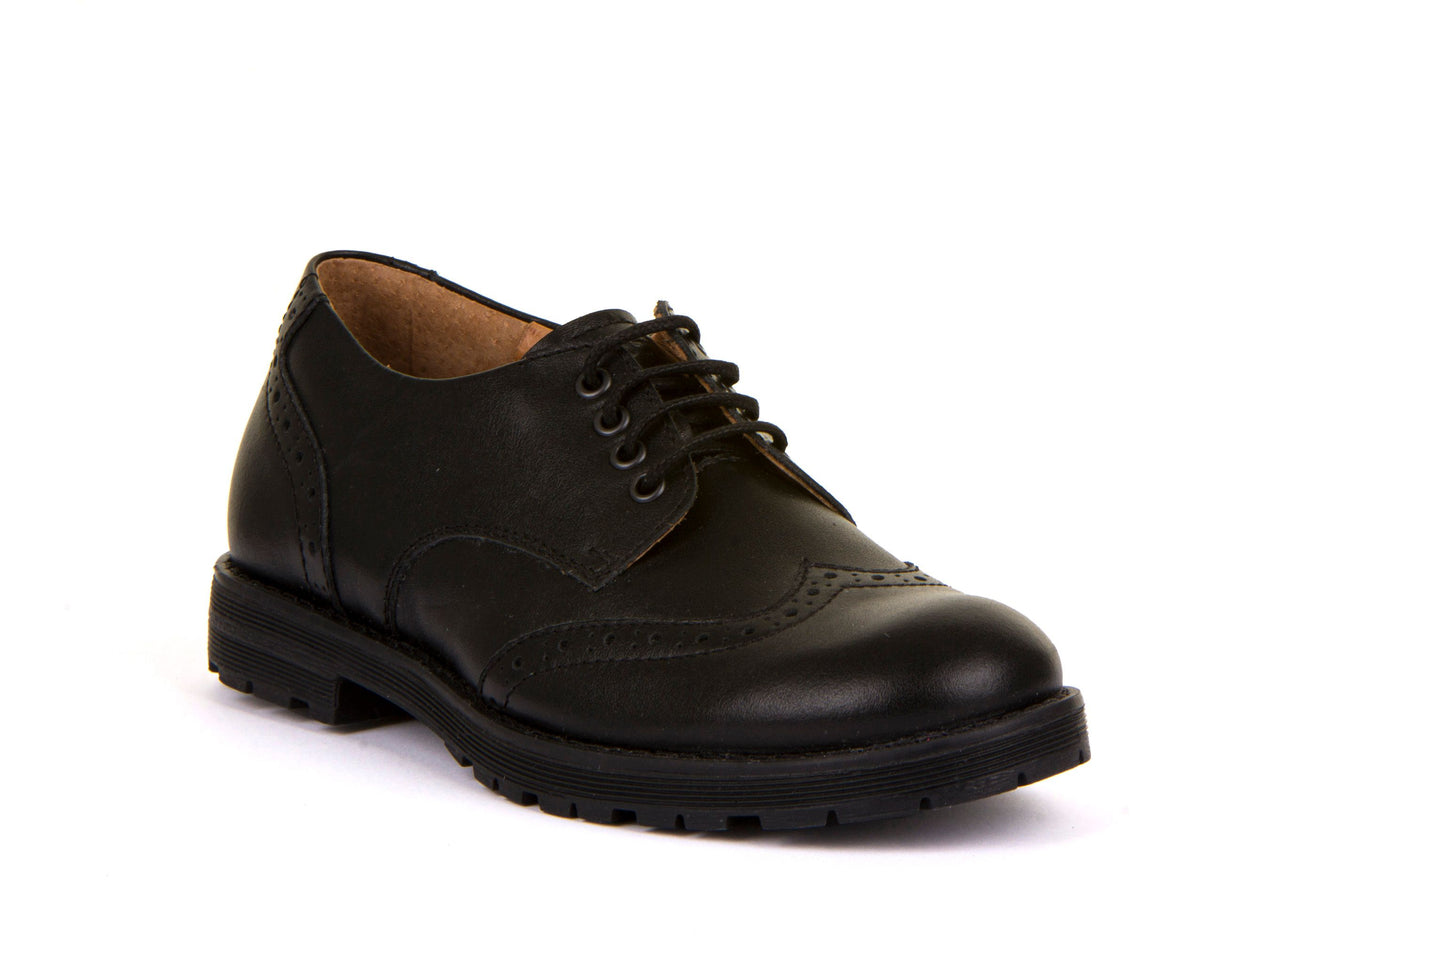 Froddo Black leather Brogue lace up School Shoes